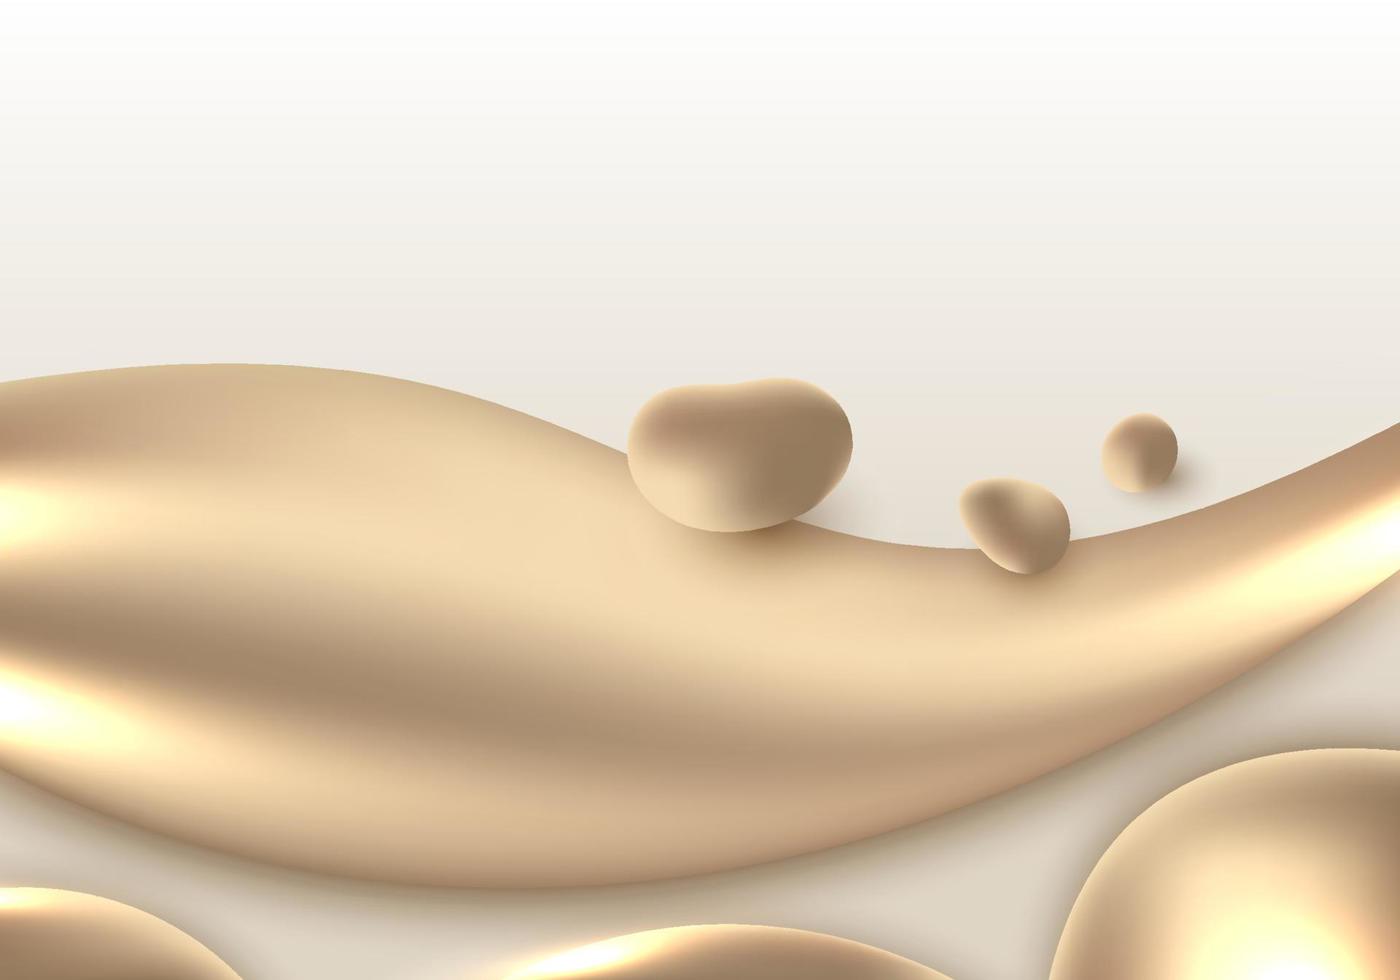 Abstract 3D golden fluid or liquid flowing on white background luxury style vector